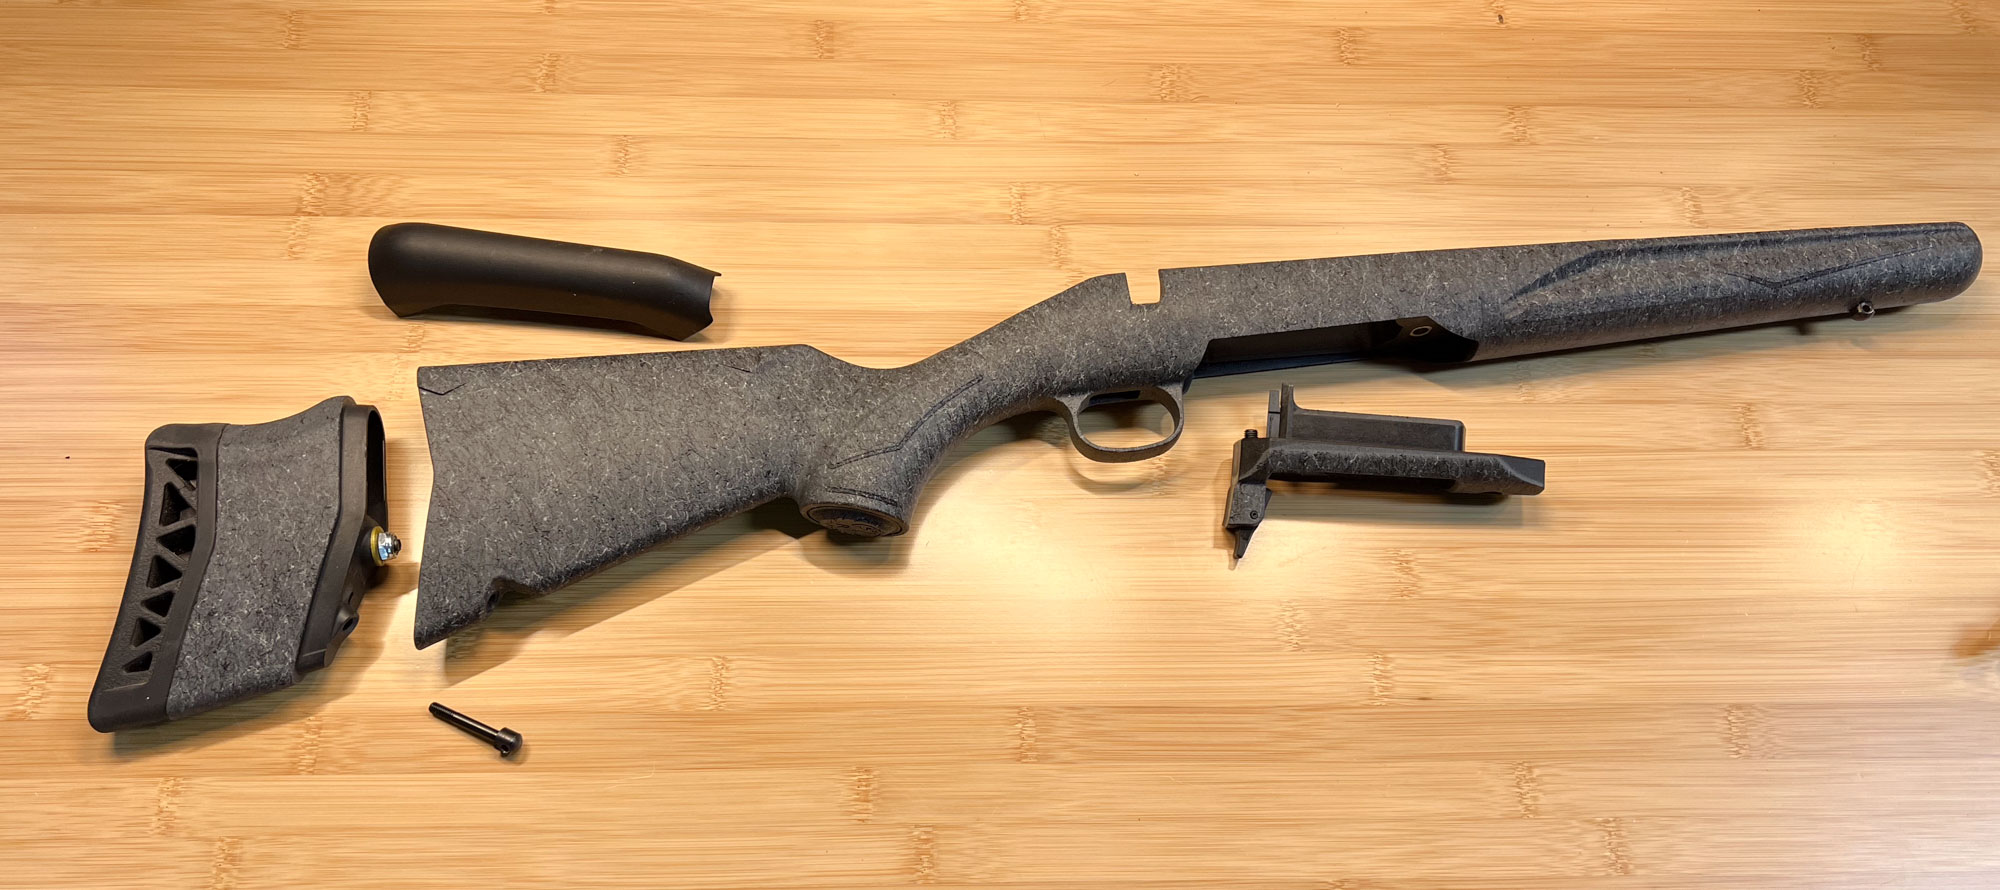 Ruger American Rifle Generation II stock in component pieces